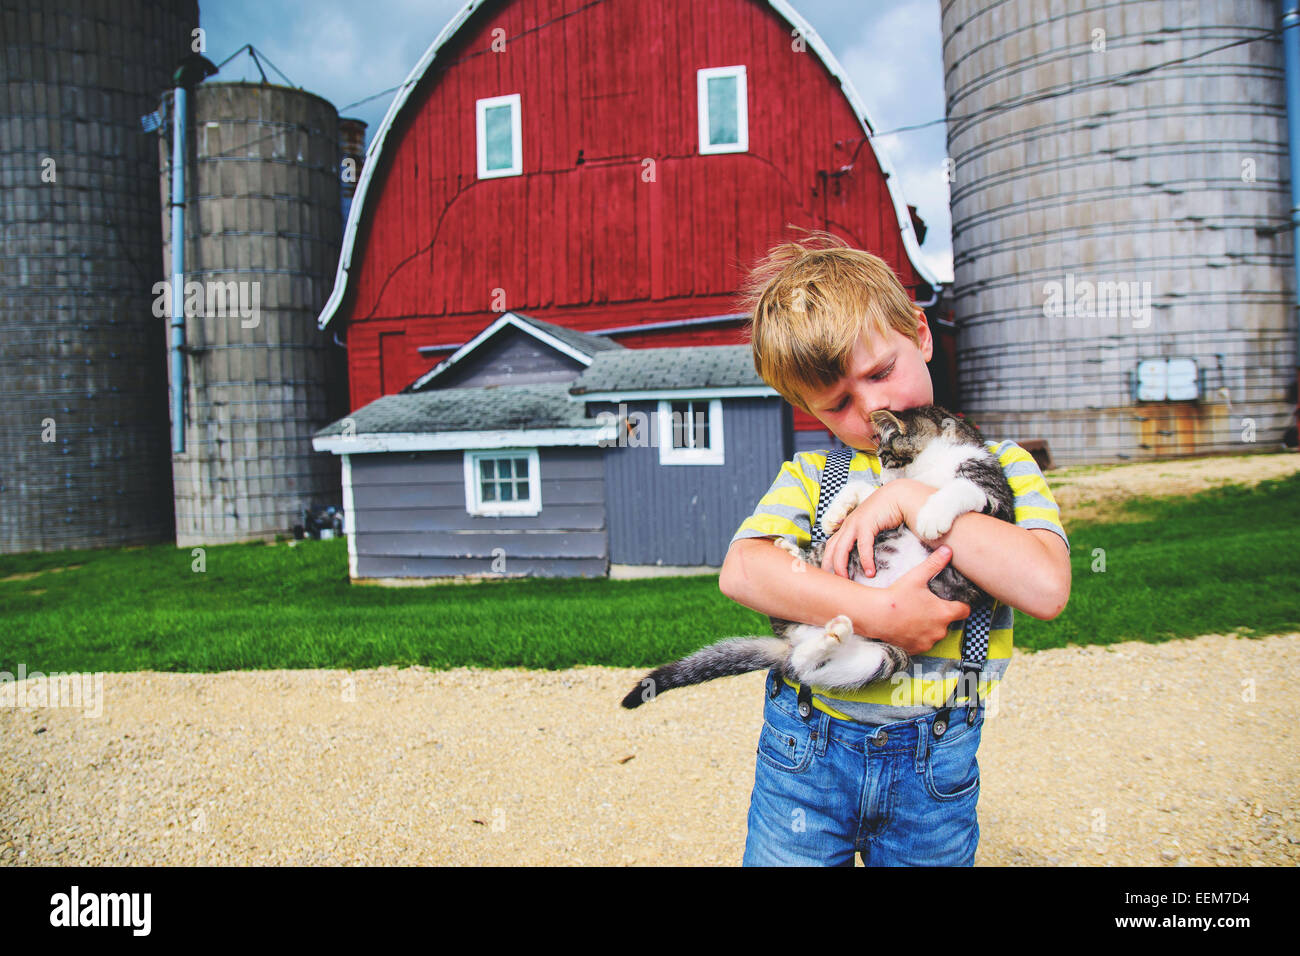 Boy (3-4) holding cat in front of farm barn Banque D'Images